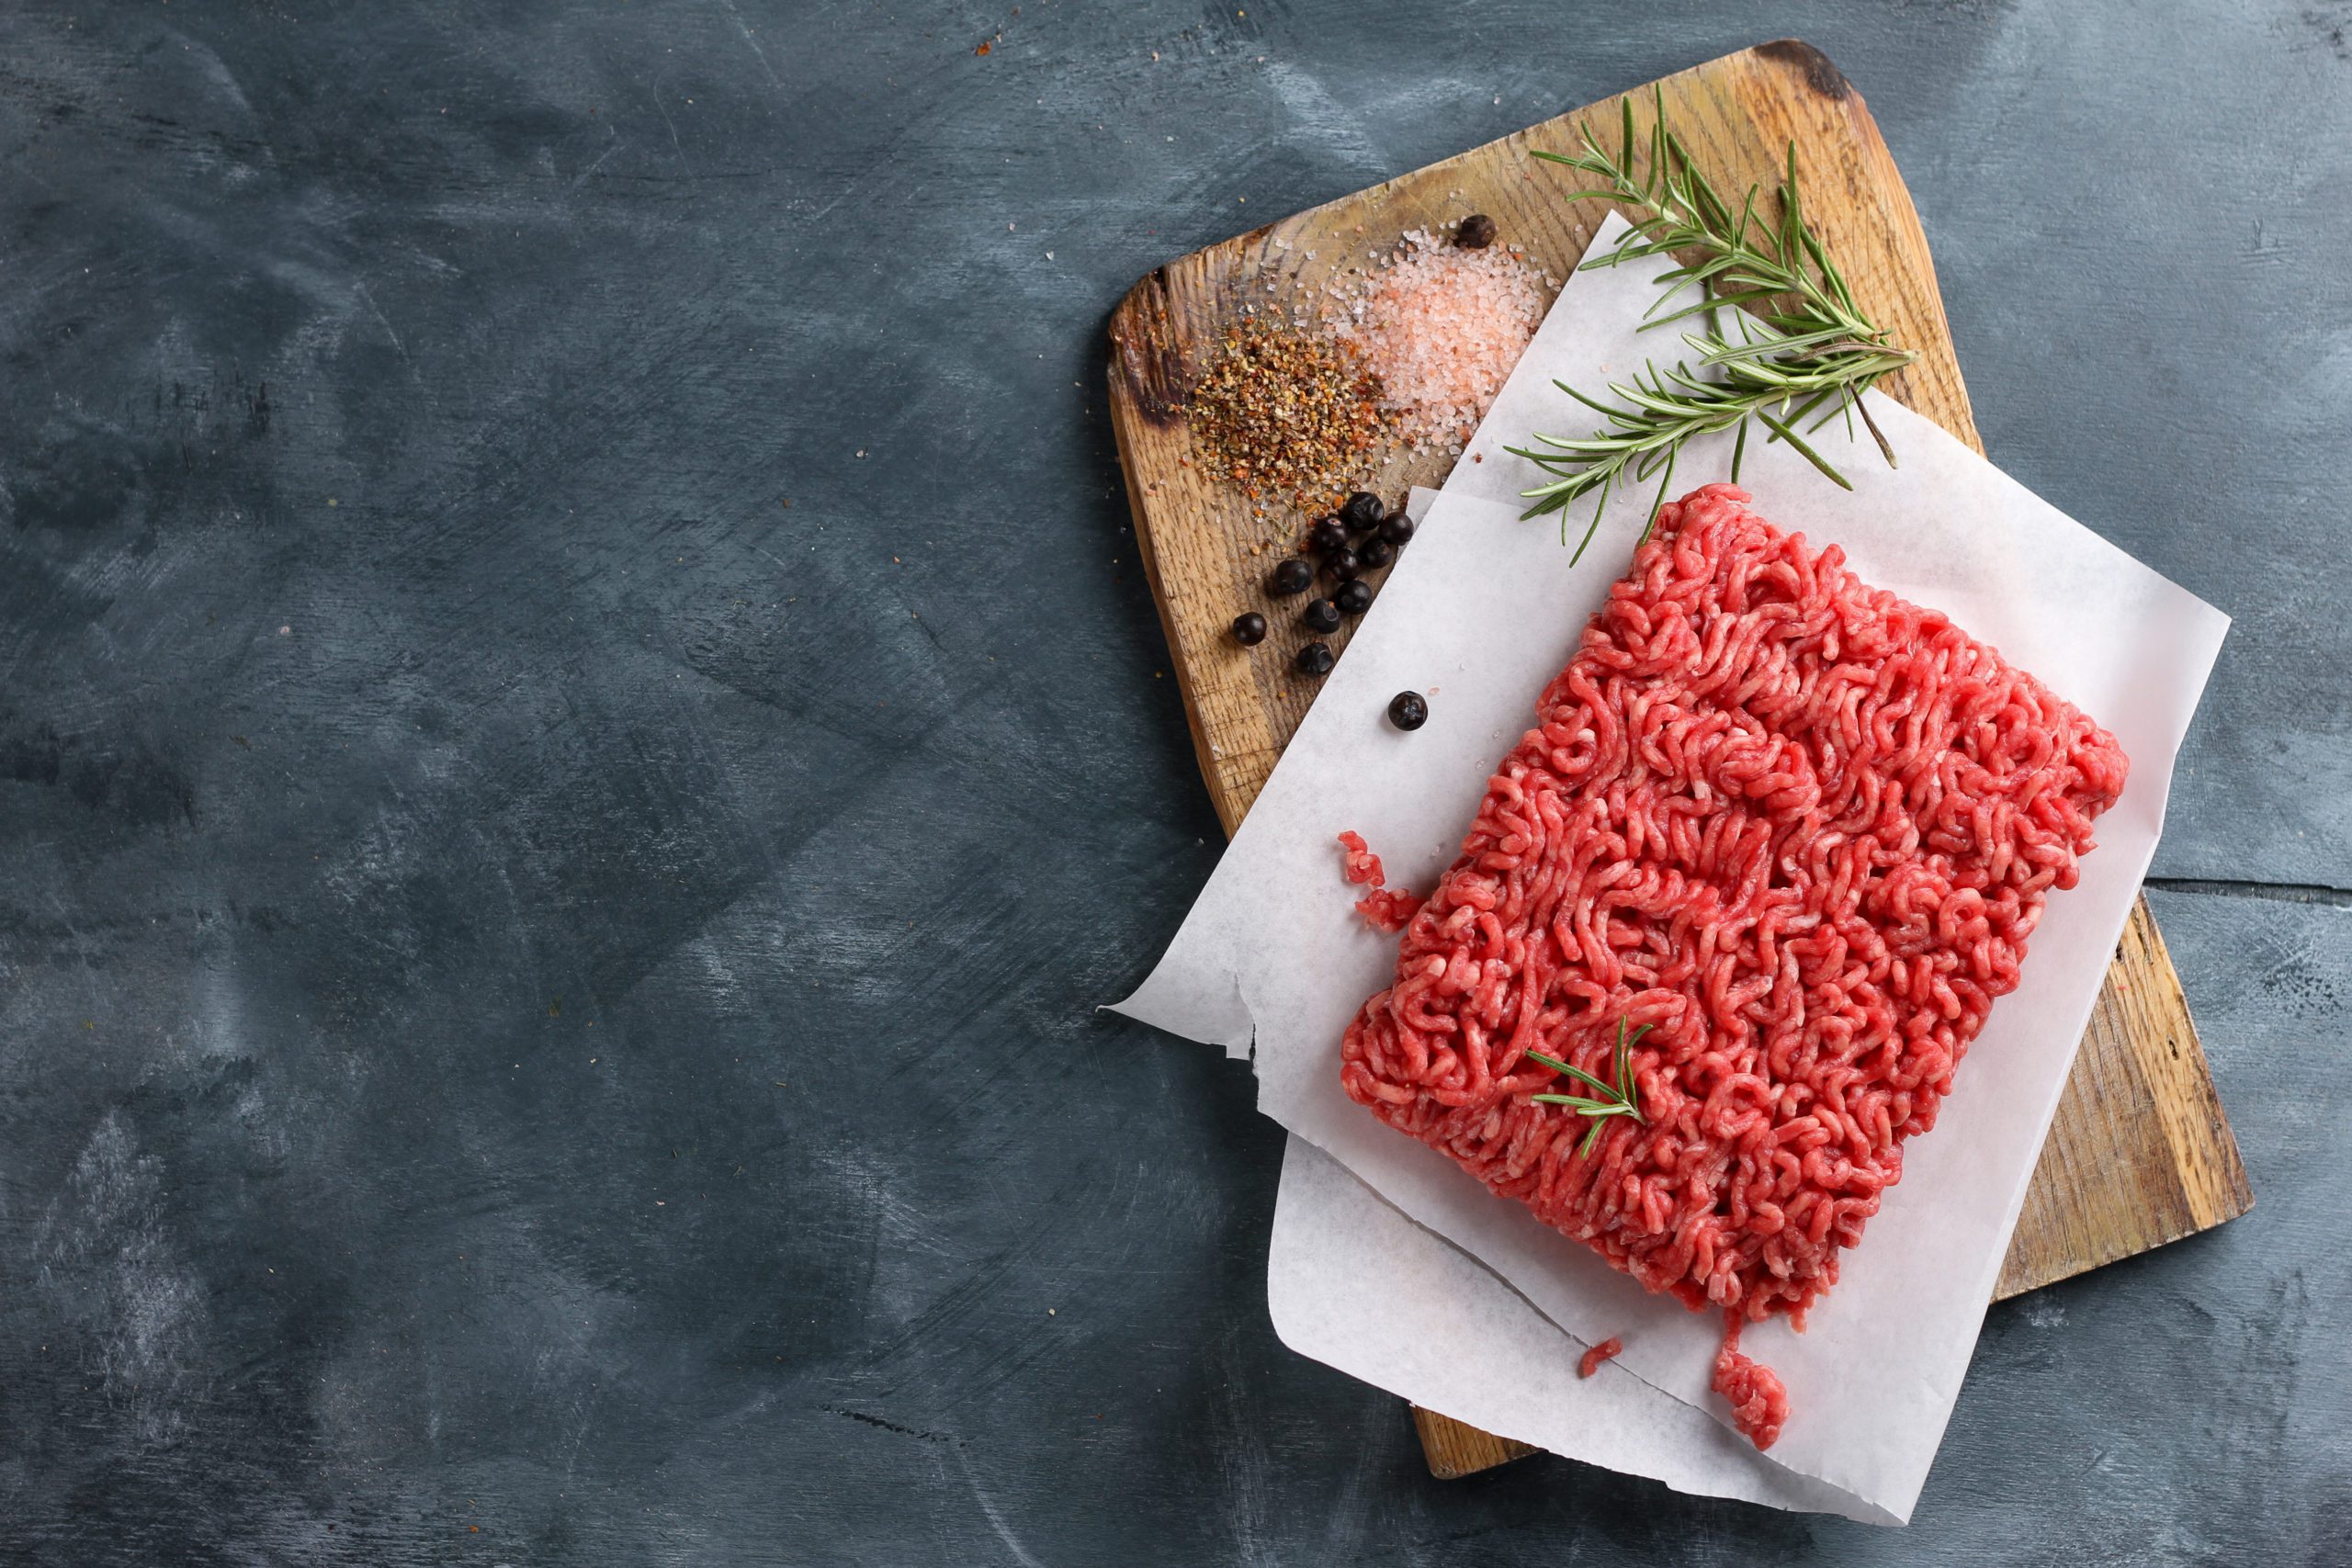 Minced meat on butcher paper with spices and rosemary, selective focus